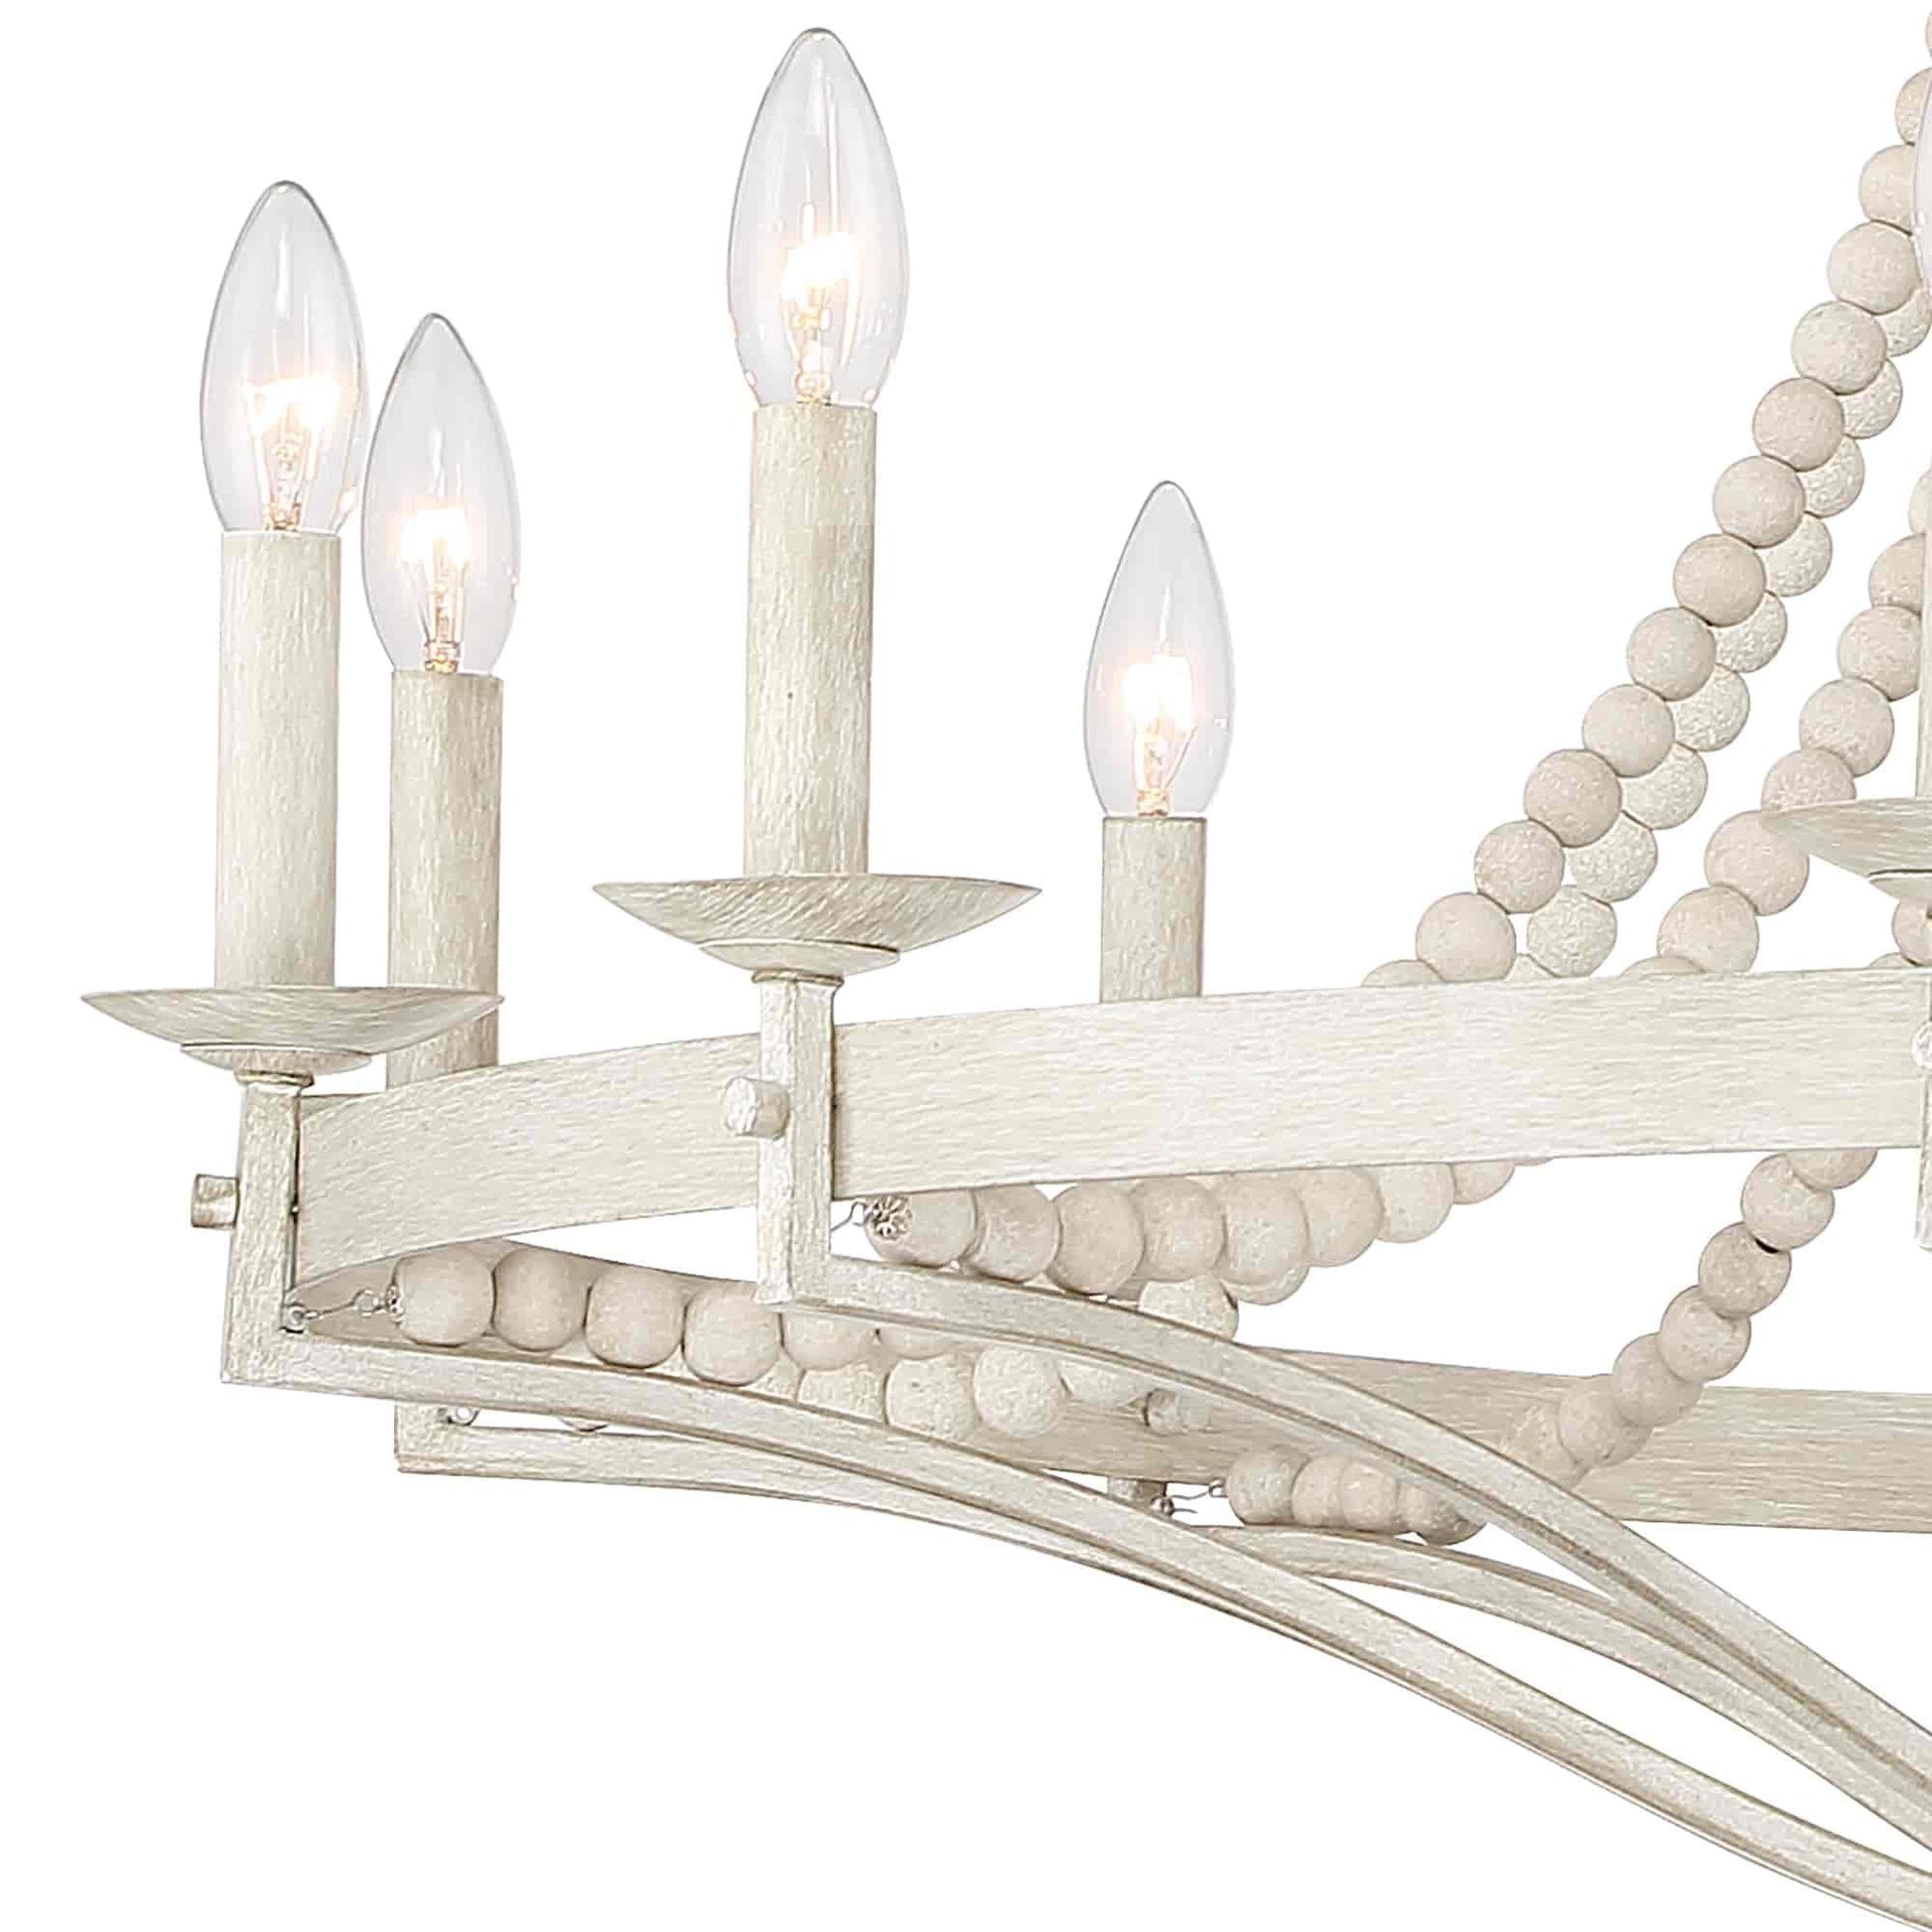 12 light candle style wagon wheel chandelier with beaded accents (9) by ACROMA